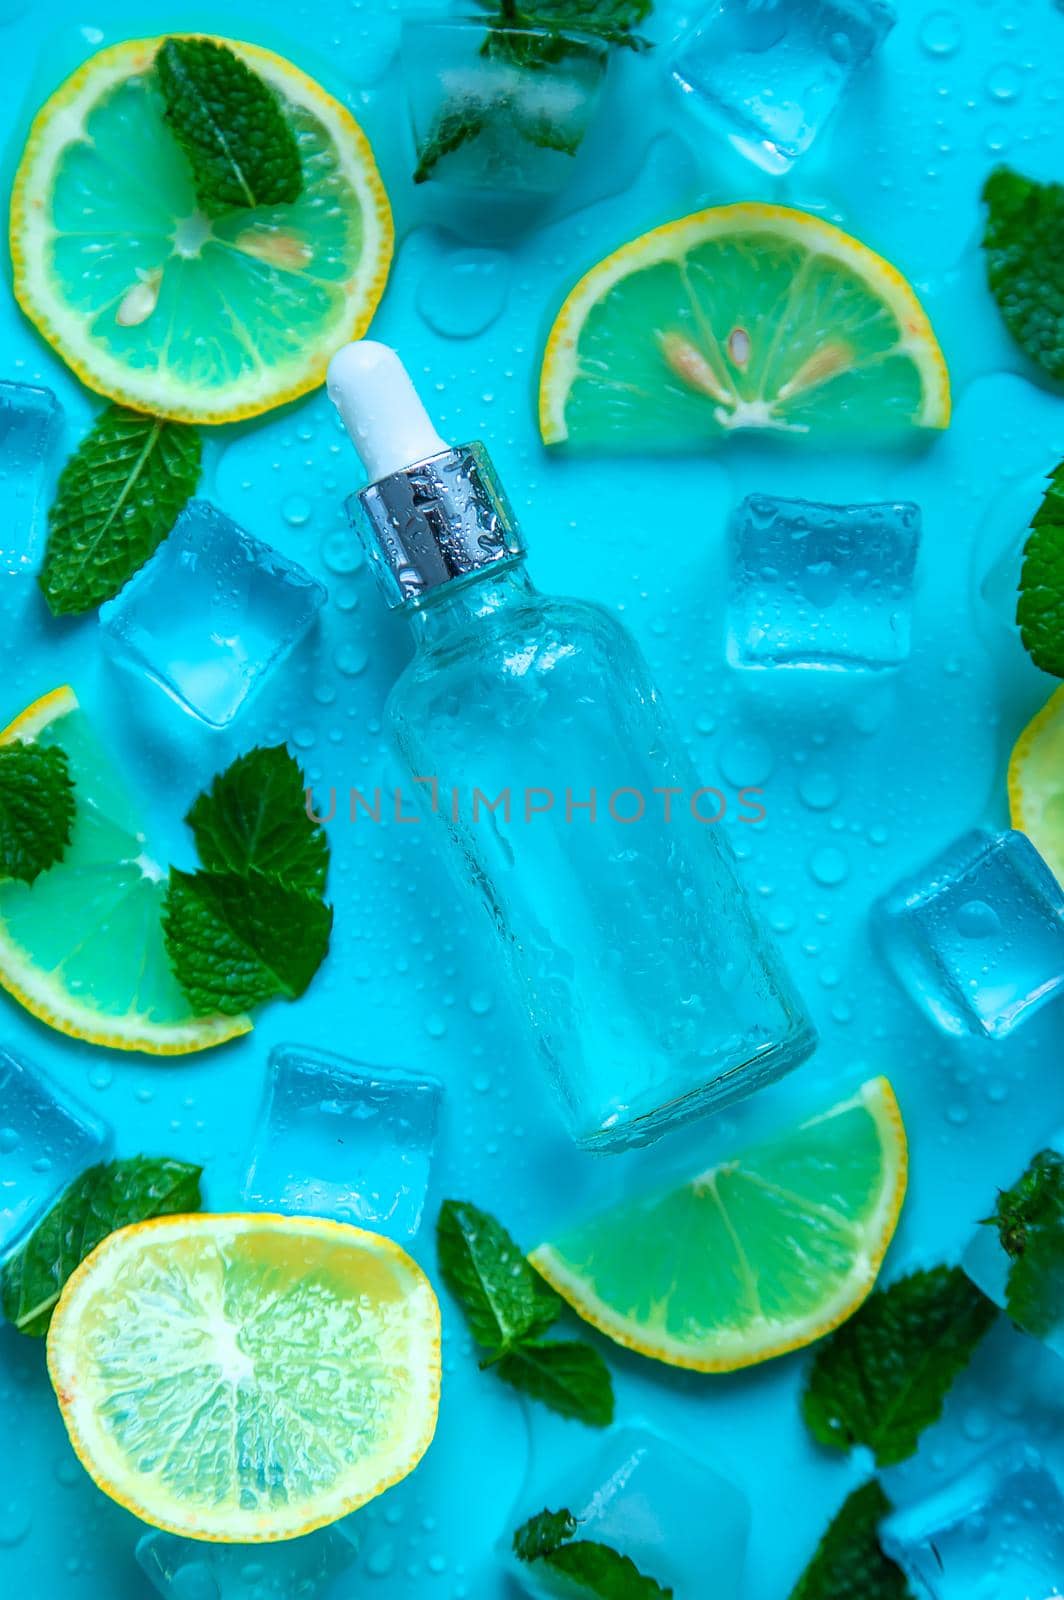 Bottle with cosmetics on a mint background with ice cubes and lemon. Selective focus. Spa.